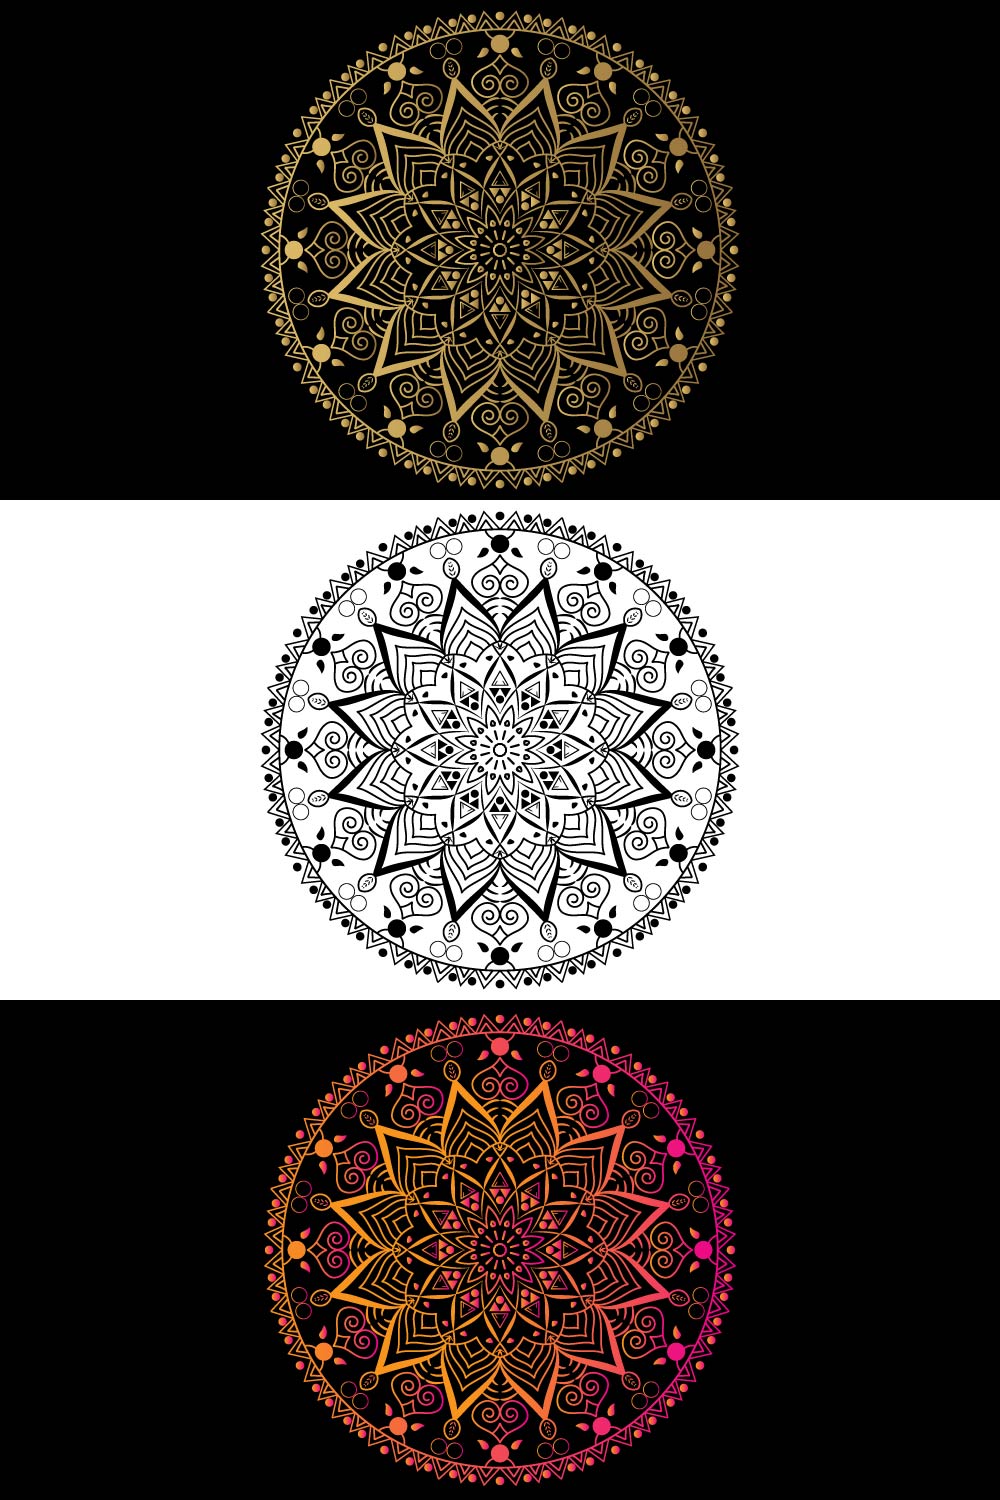 Collection of images with enchanting round mandalas.